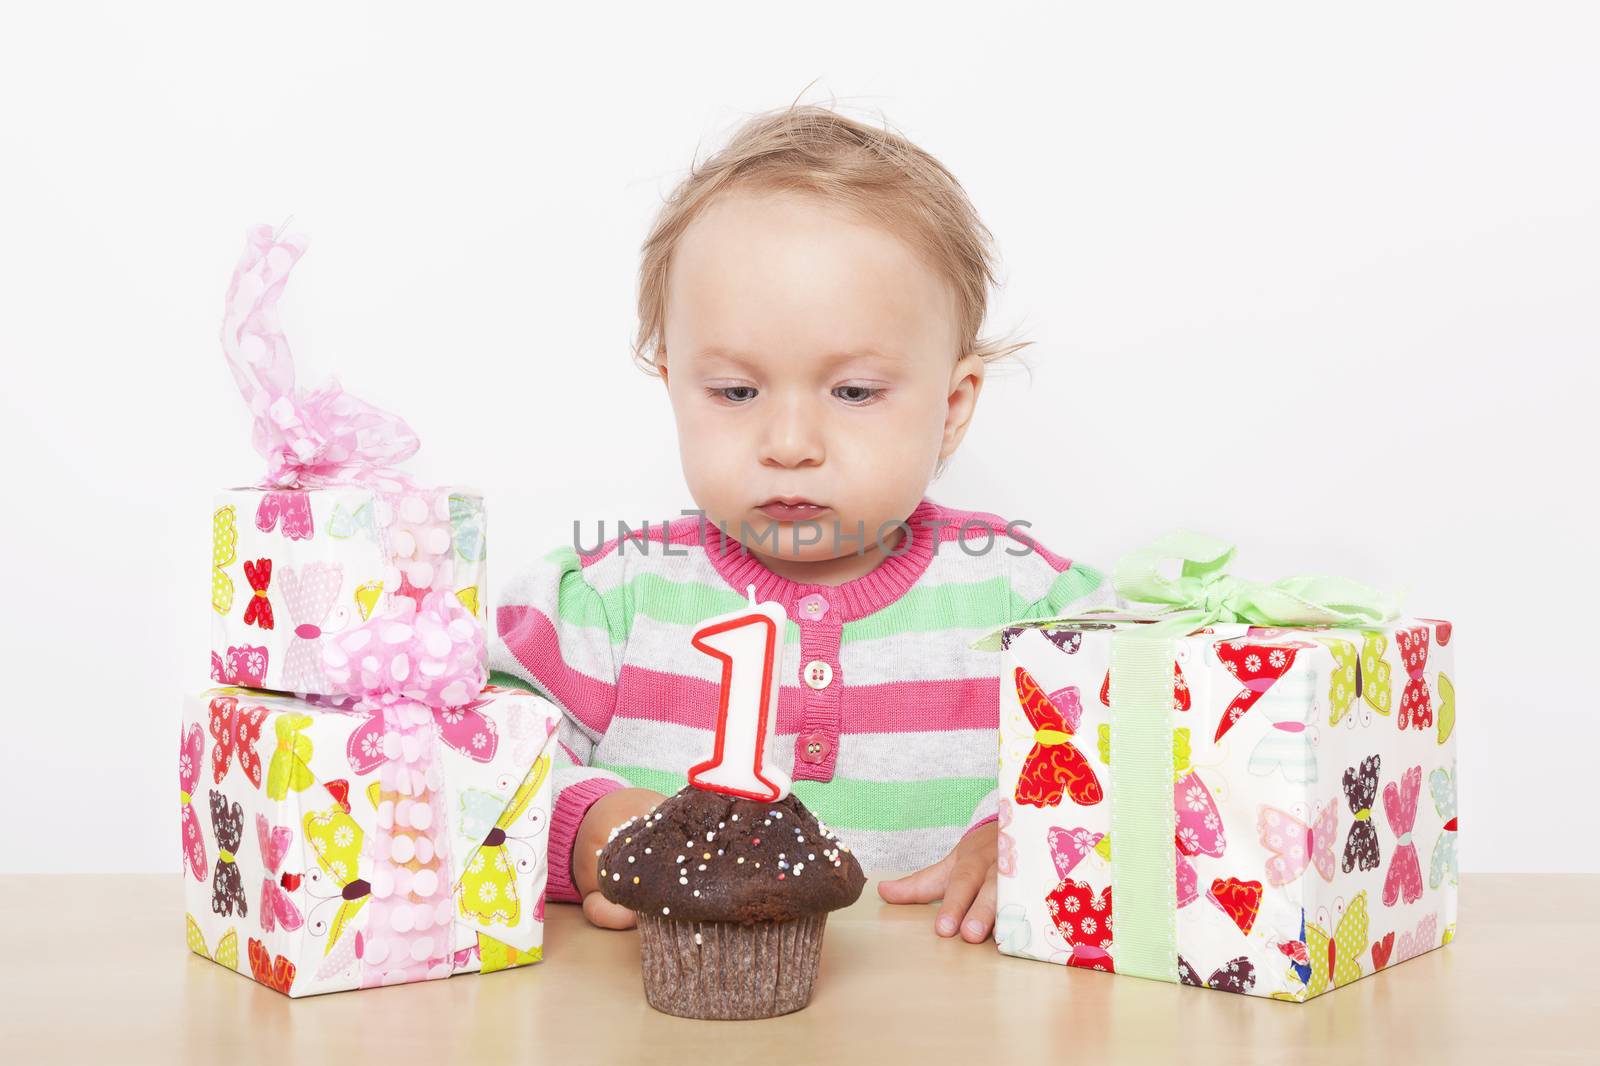 First birthday. Cute baby girl with birthday cake and birthday presents. 